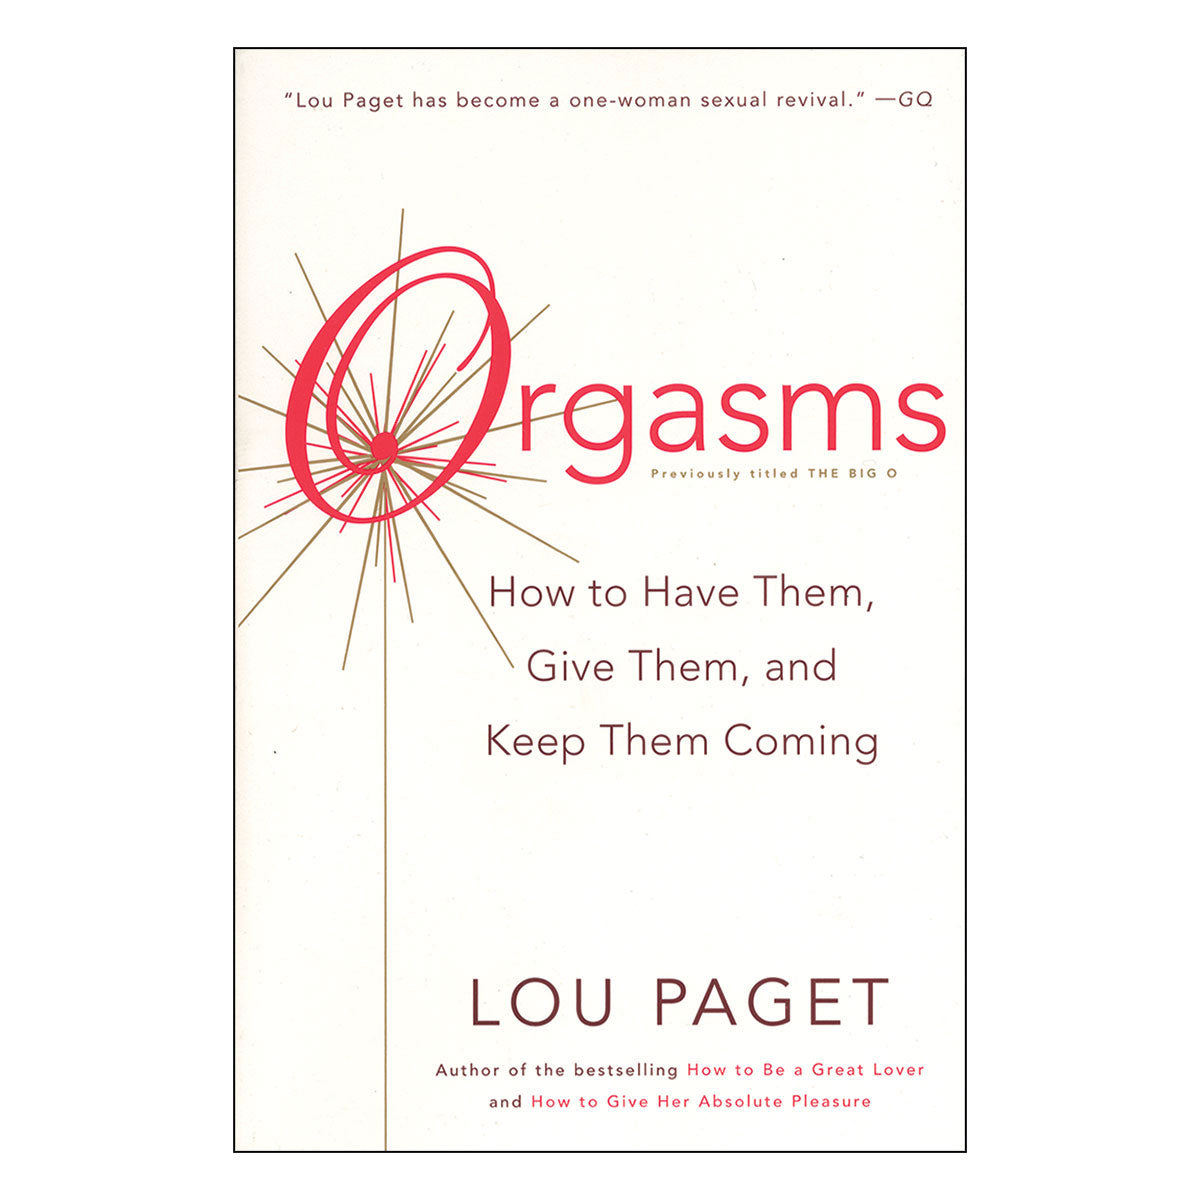 Orgasms: How to Have Them, Give Them, And Keep Them Coming - How to Have Them, Give Them, and Keep Them Coming - Broadway Books